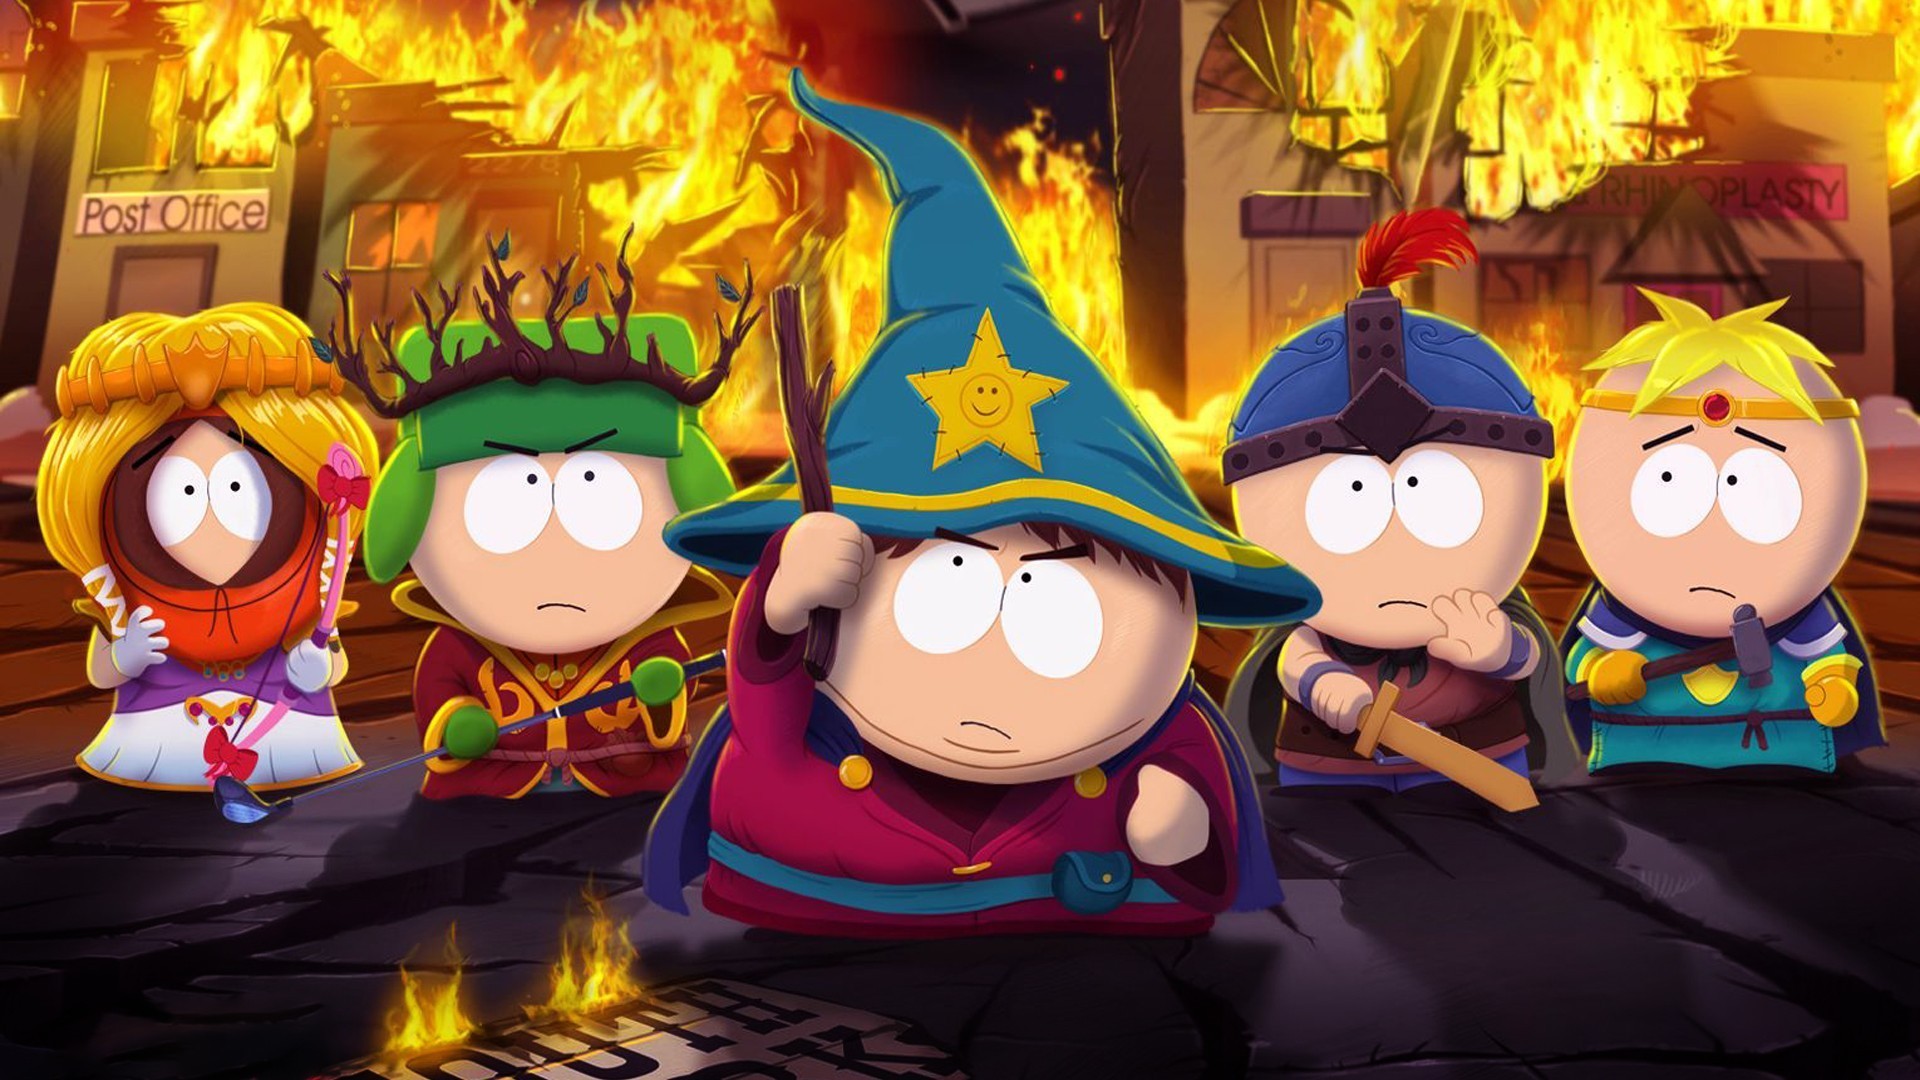 south park south park the stick of truth eric cartman Wallpaper